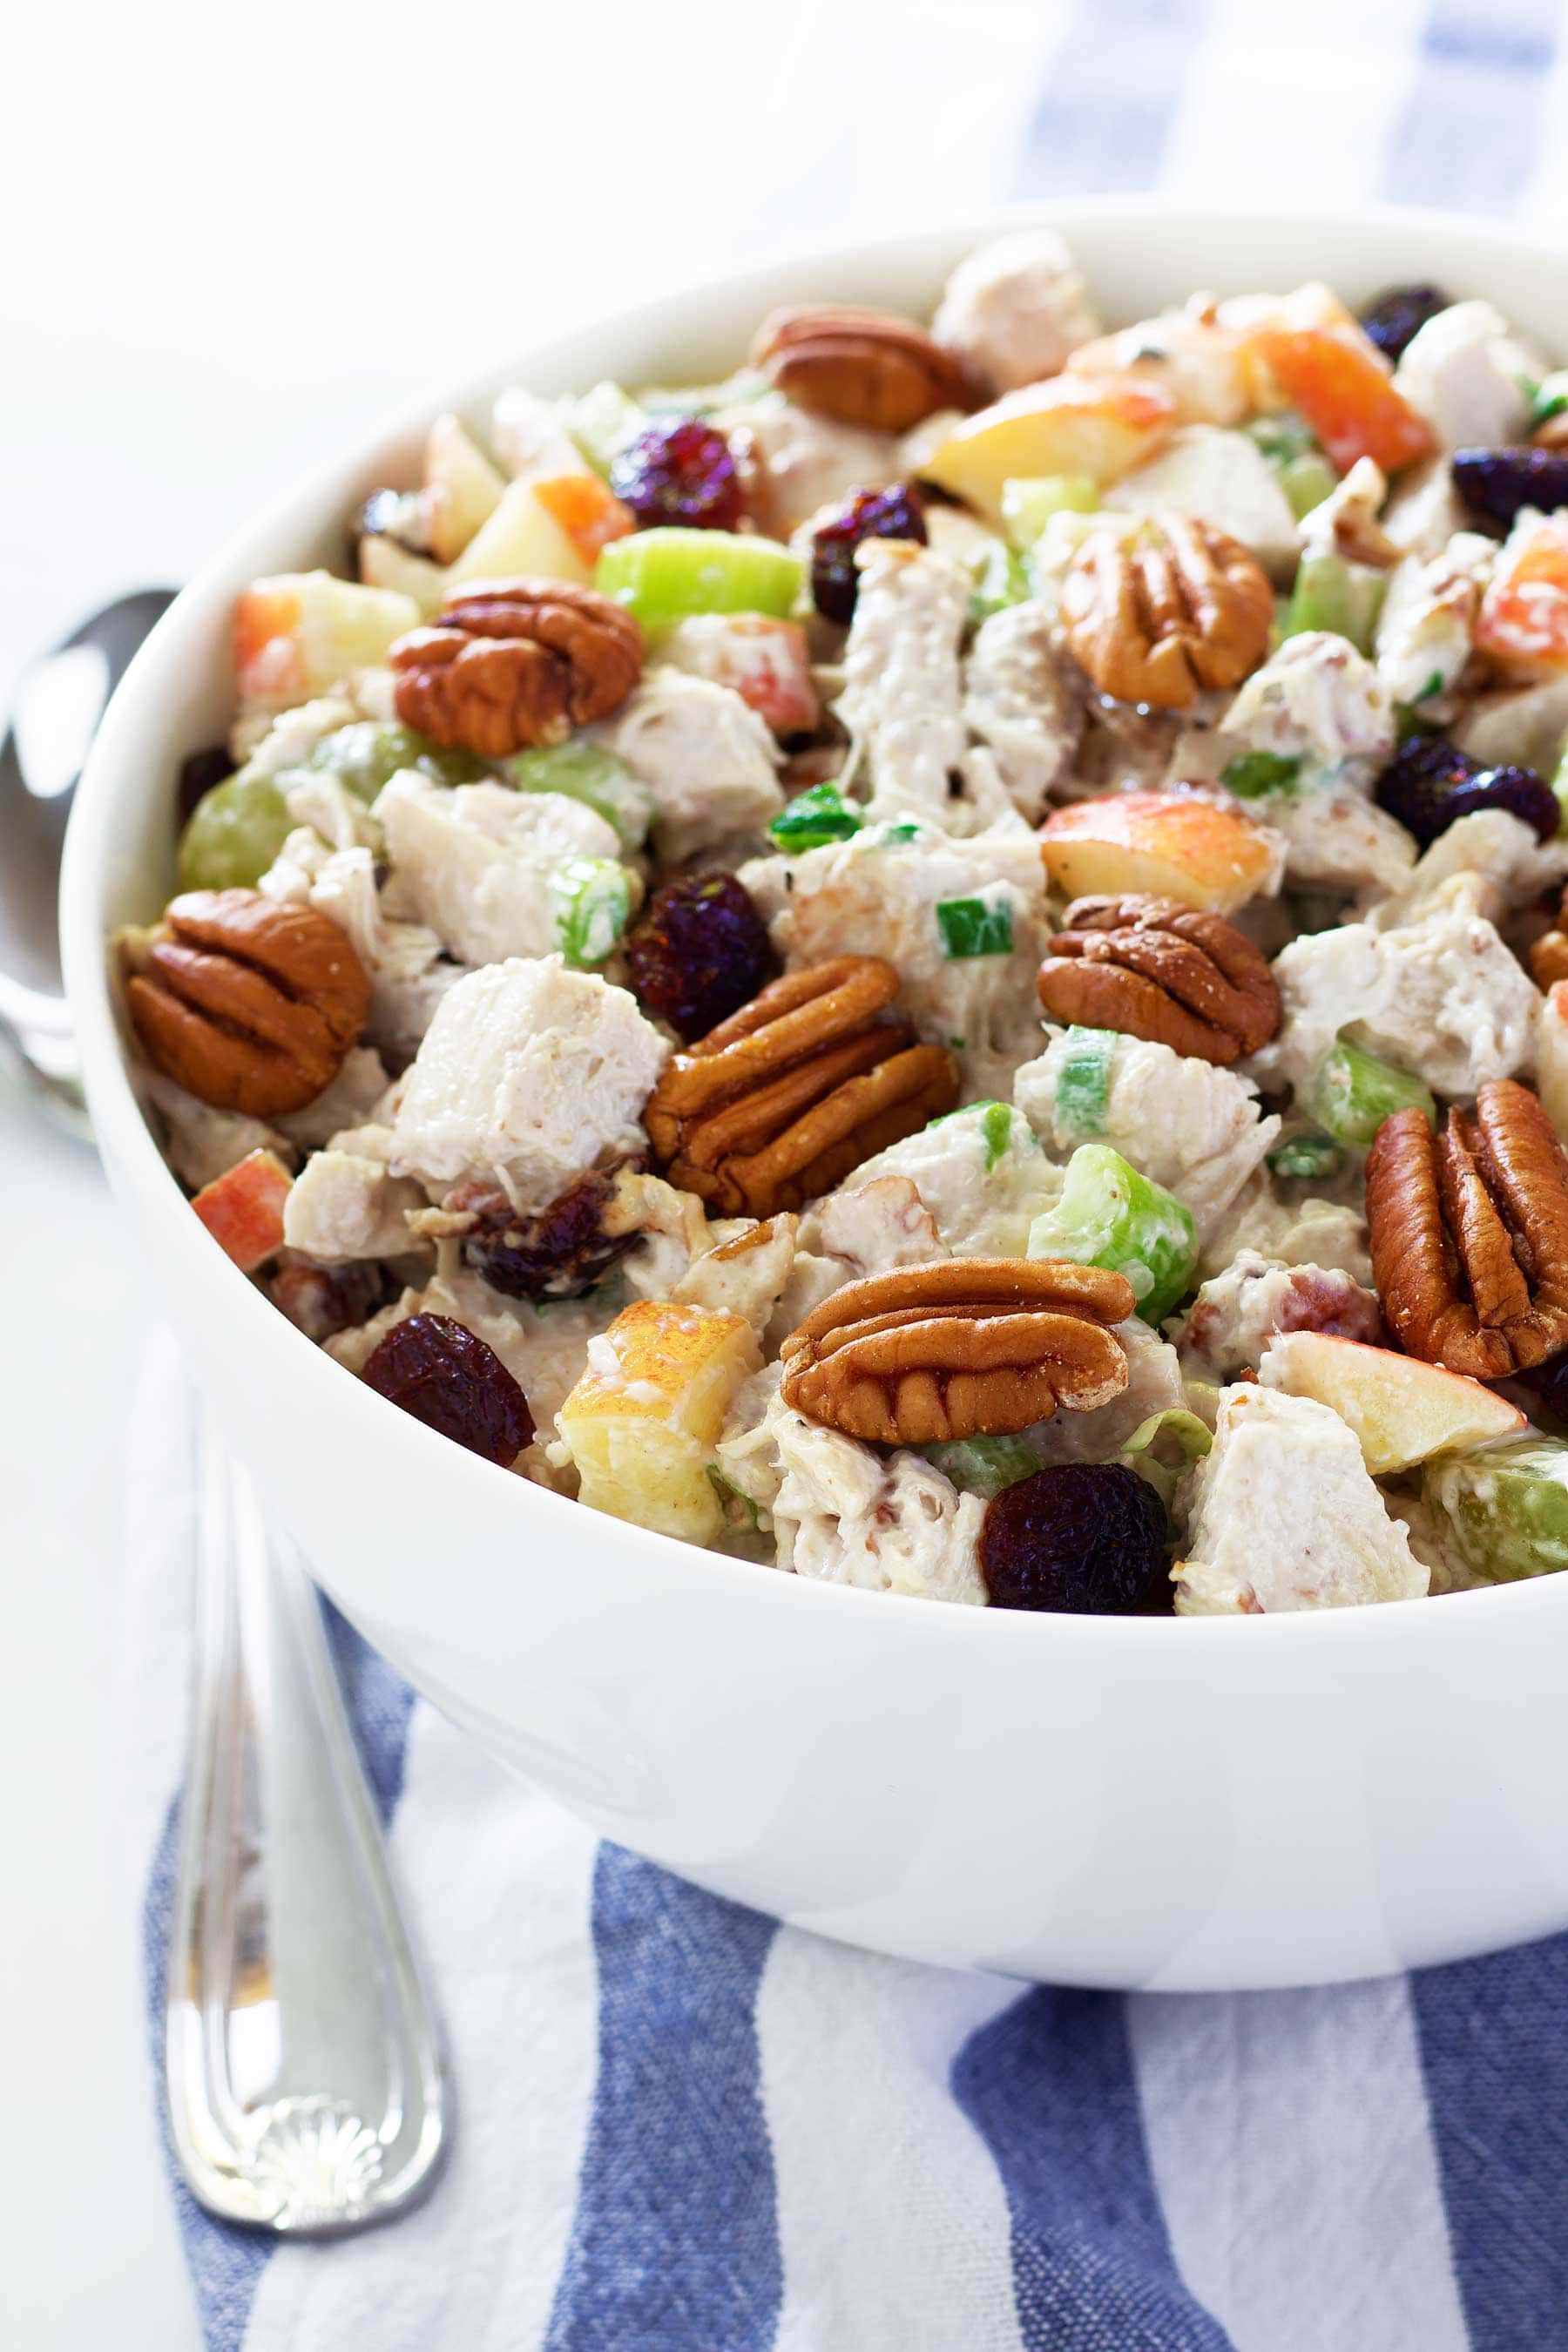 Use up your leftover turkey with this easy recipe! This Leftover Turkey Salad recipe is so simple to make, paleo, gluten free, Whole30, and can easily be made low carb and keto! 
#healthythanksgiving #healthychristmas #turkey #leftoverturkey #thanksgivingleftovers #christmasrecipes #jicama #apple #cranberries #crasins #pecans #glutenfreethanksgiving #glutenfree #ketothanksgiving #ketochristmas #lowcarbthanksgiving #lowcarbchristmas